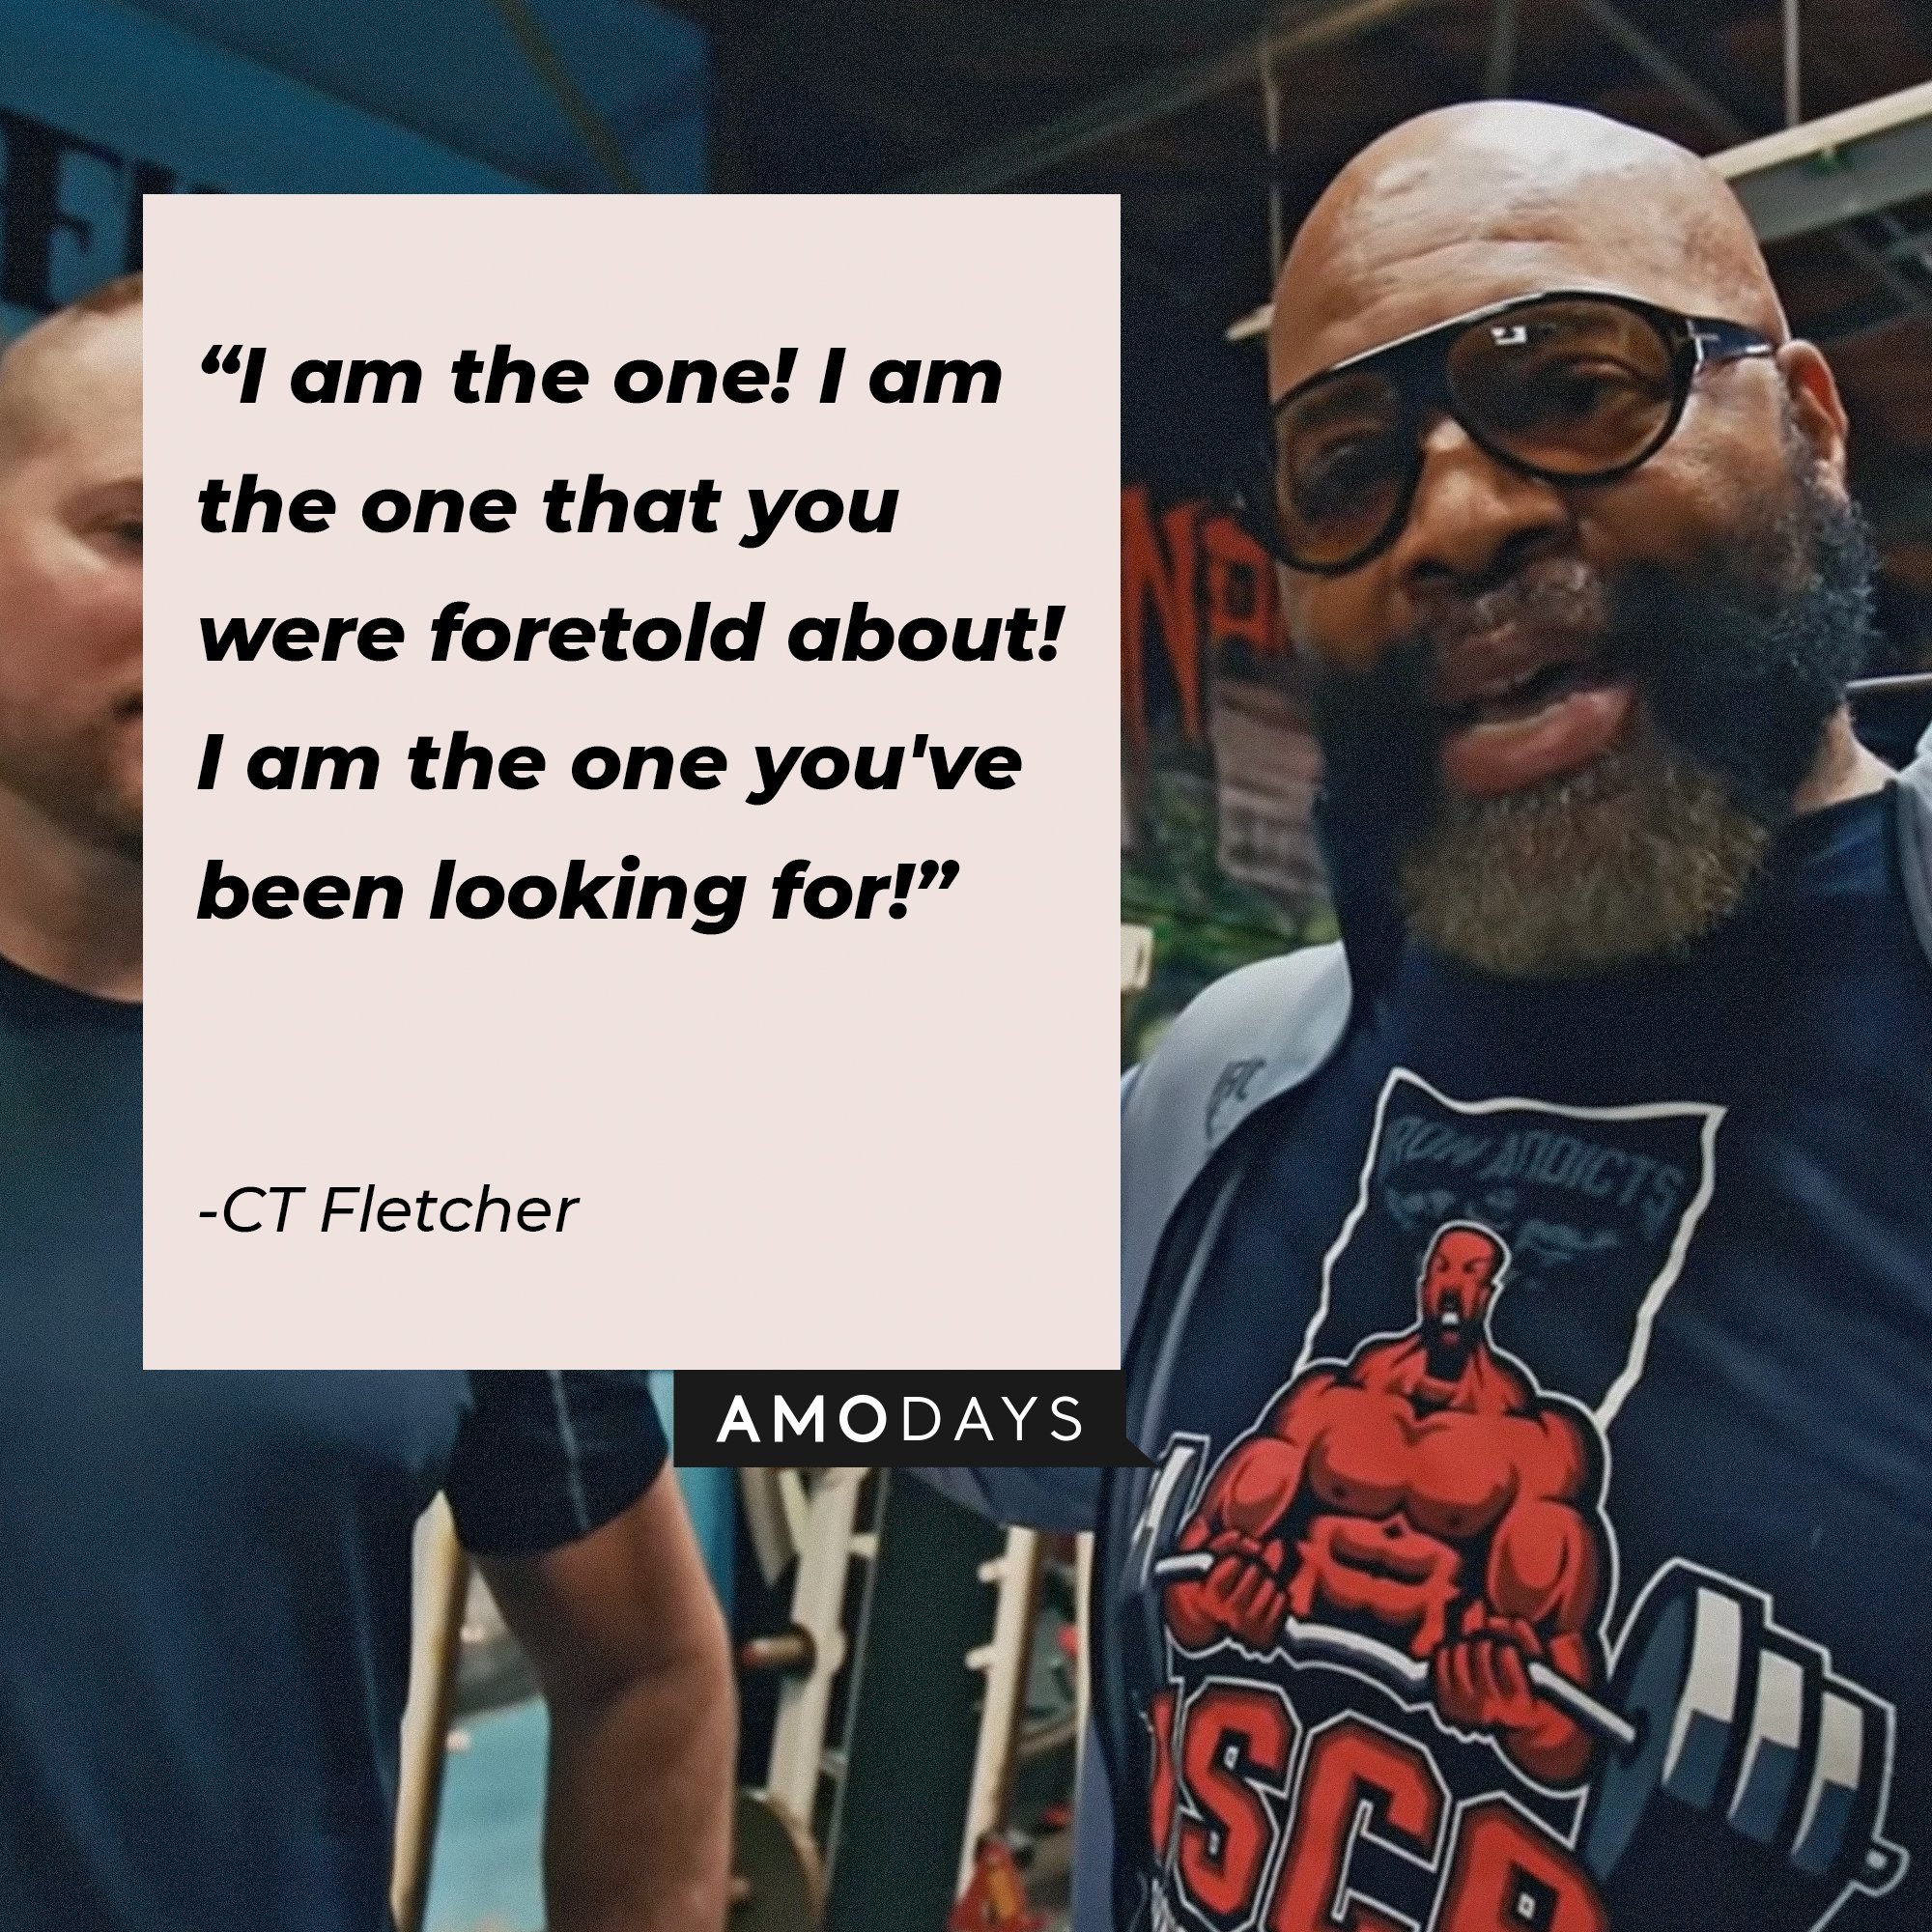 CT Fletcher's quote:\\\\\\\\u00a0"I am the one! I am the one that you were foretold about! I am the one you've been looking for!"\\\\\\\\u00a0| Image: AmoDays